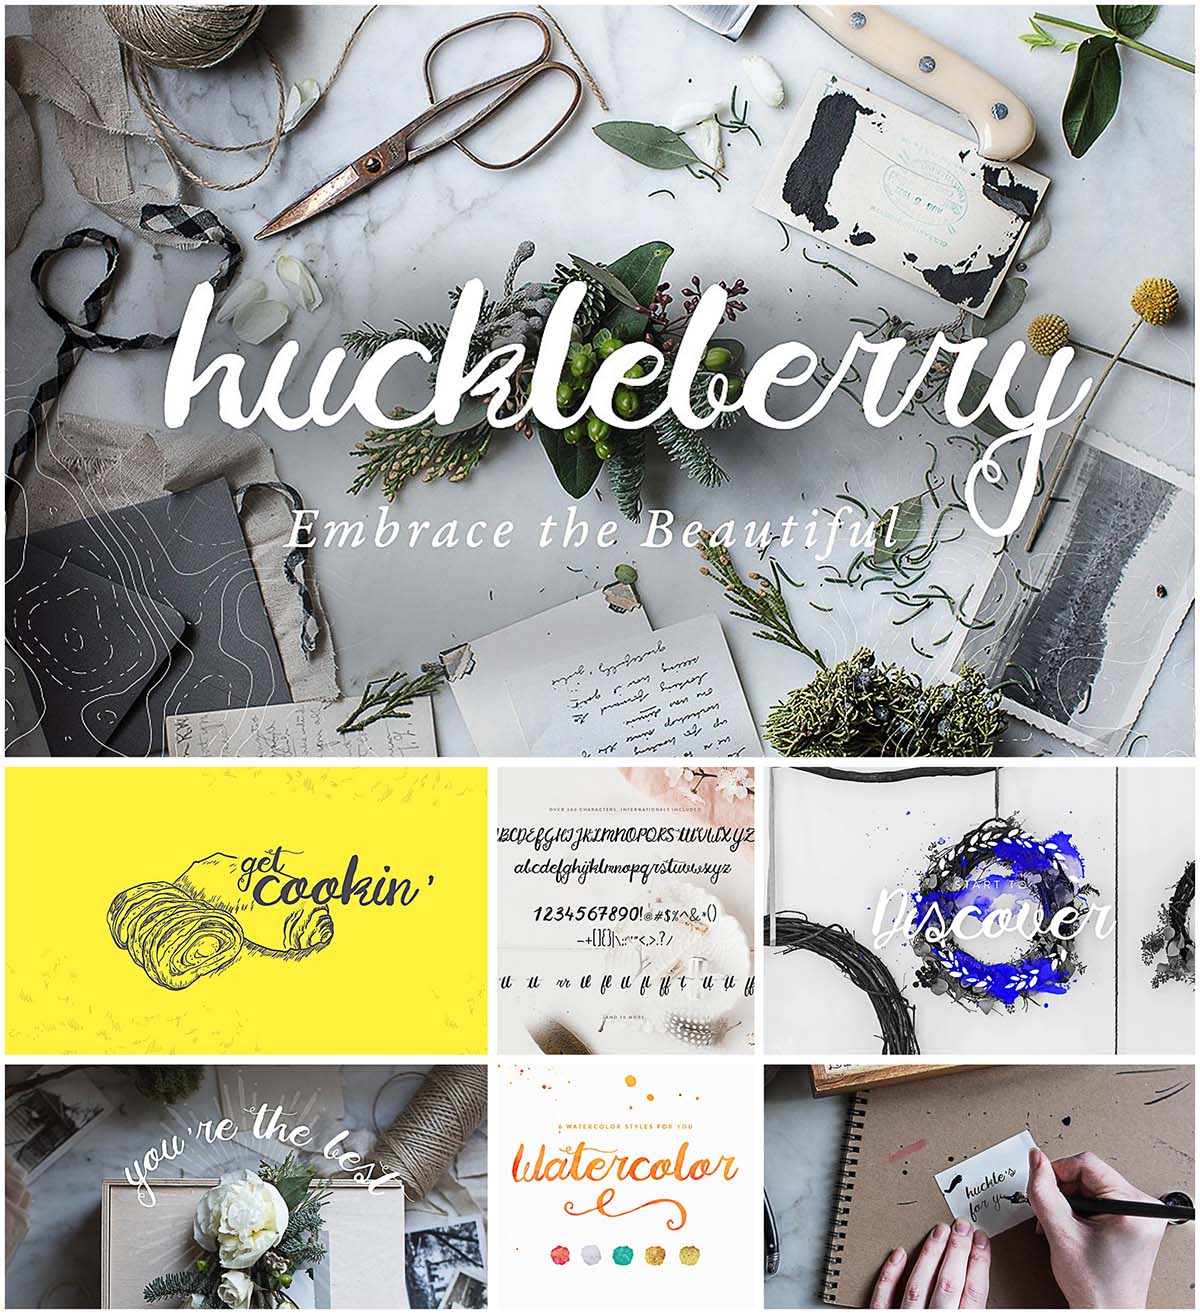 The charming Huckleberry script